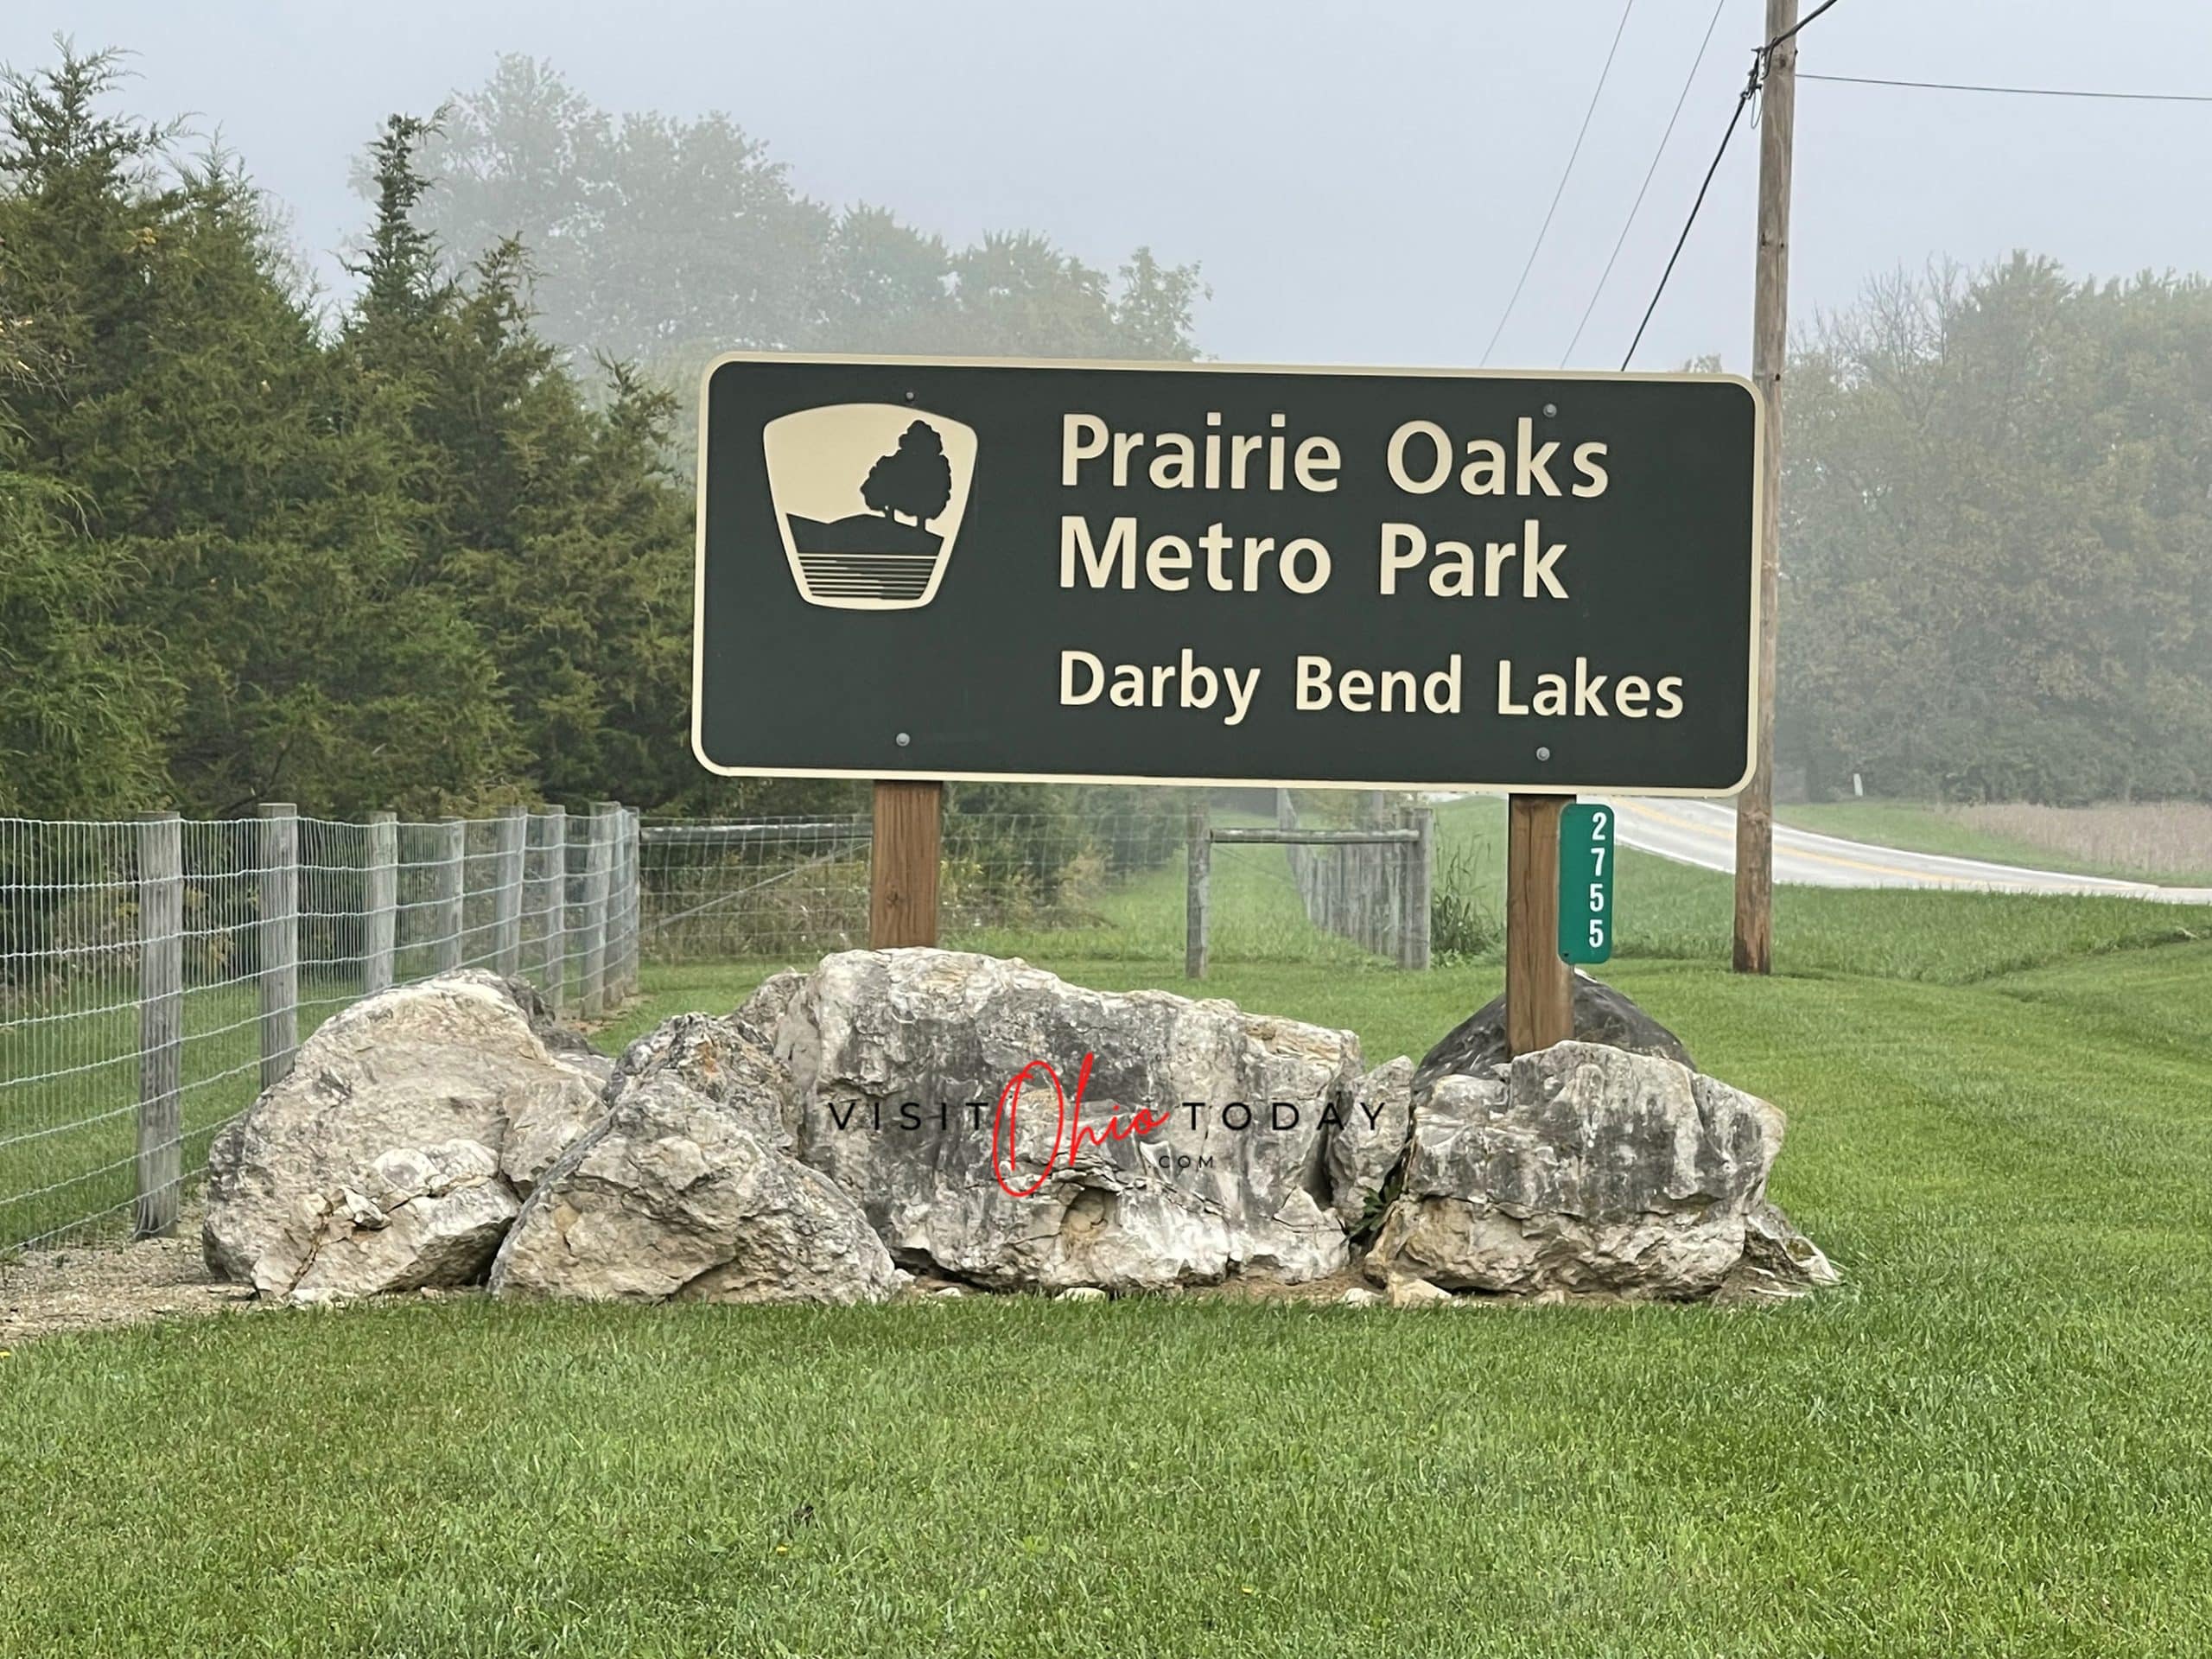 horizontal photo showing the entrance sign to the Darby Bend Lakes area of Prairie Oaks Metro Park Photo credit: Cindy Gordon of VisitOhioToday.com